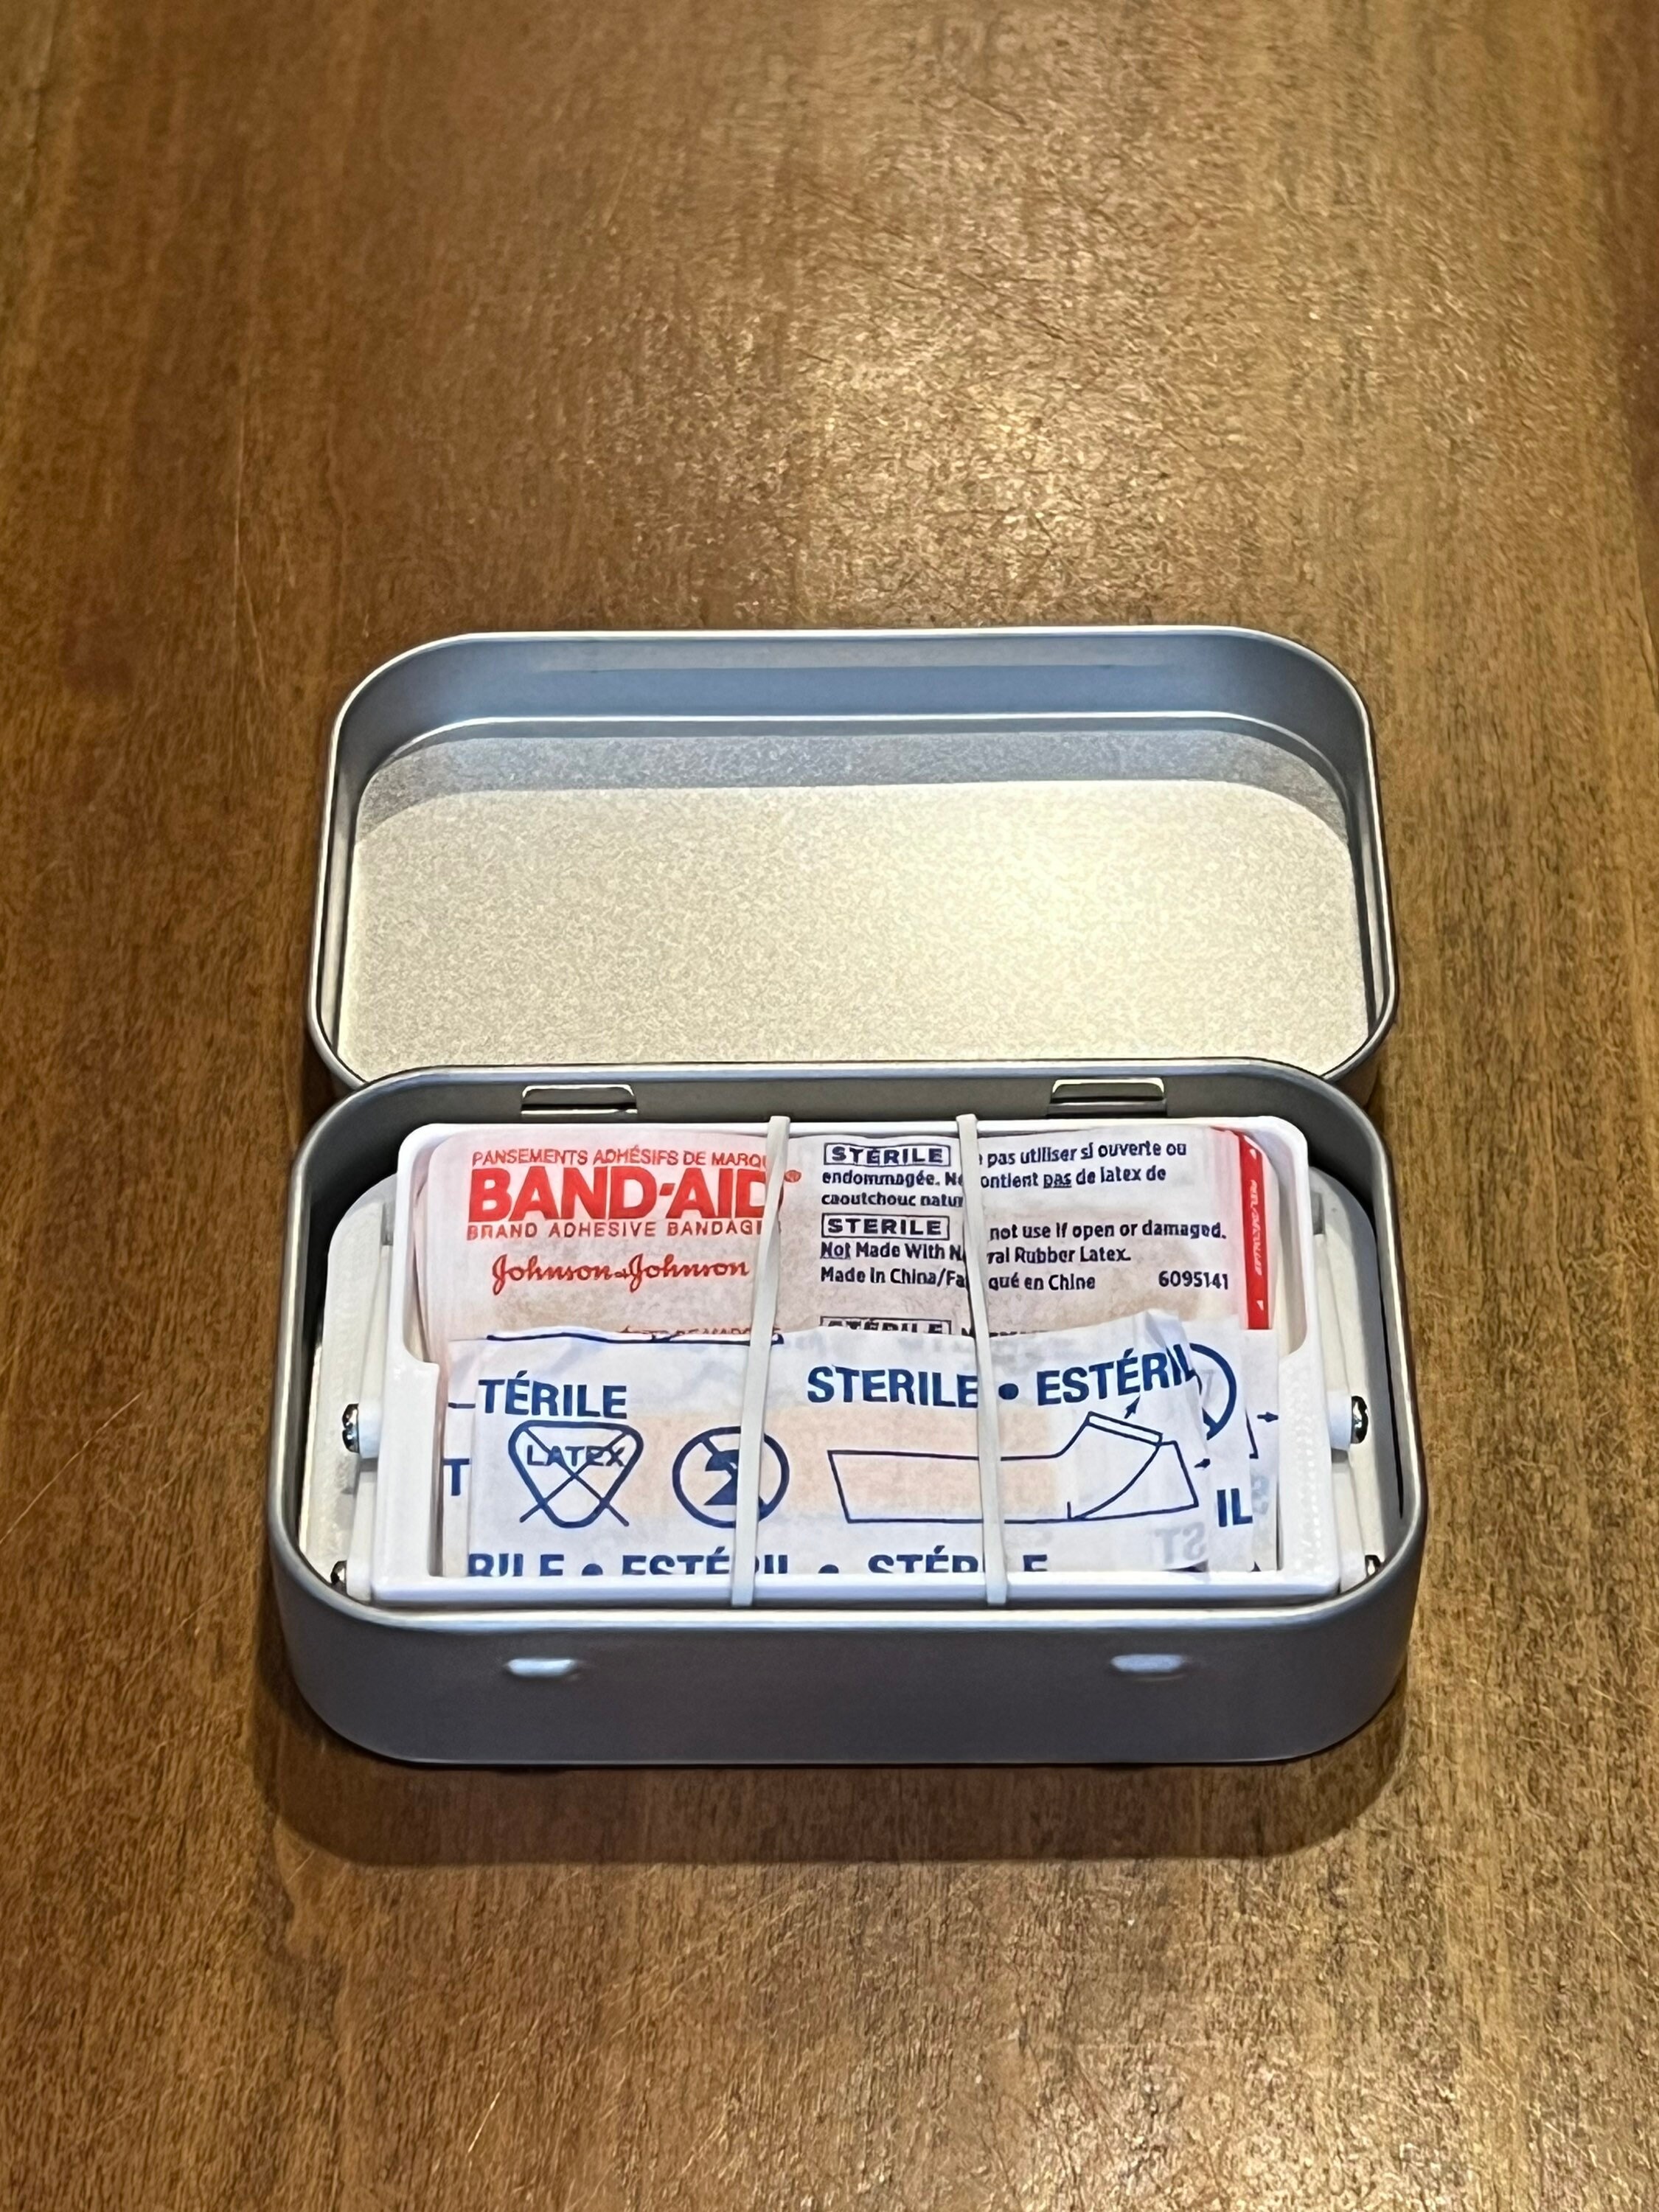 Recycled Altoids Tin First Aid Kit